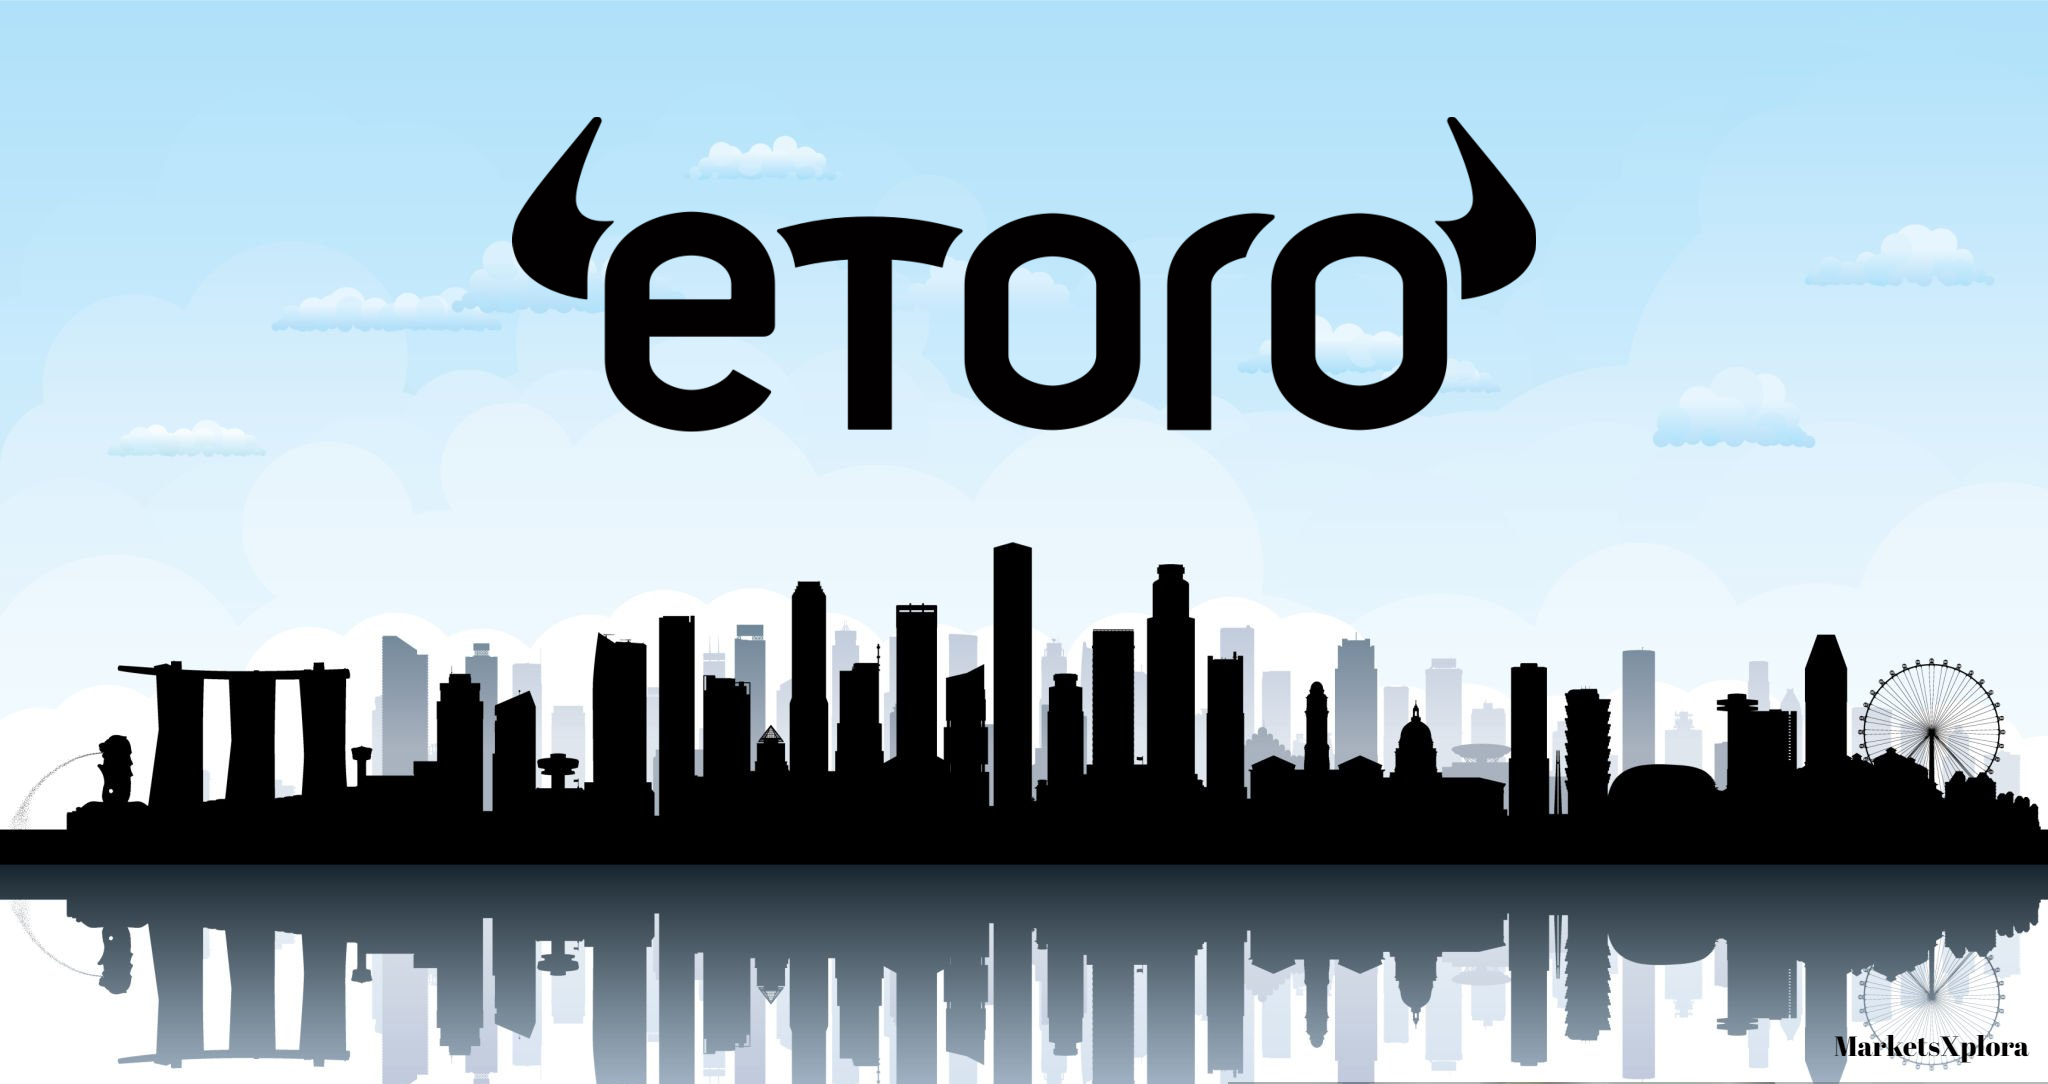 Multi-asset broker eToro has applied for a regulatory license in Singapore, as the company looks to establish a presence in the fast-growing Asian financial hub.